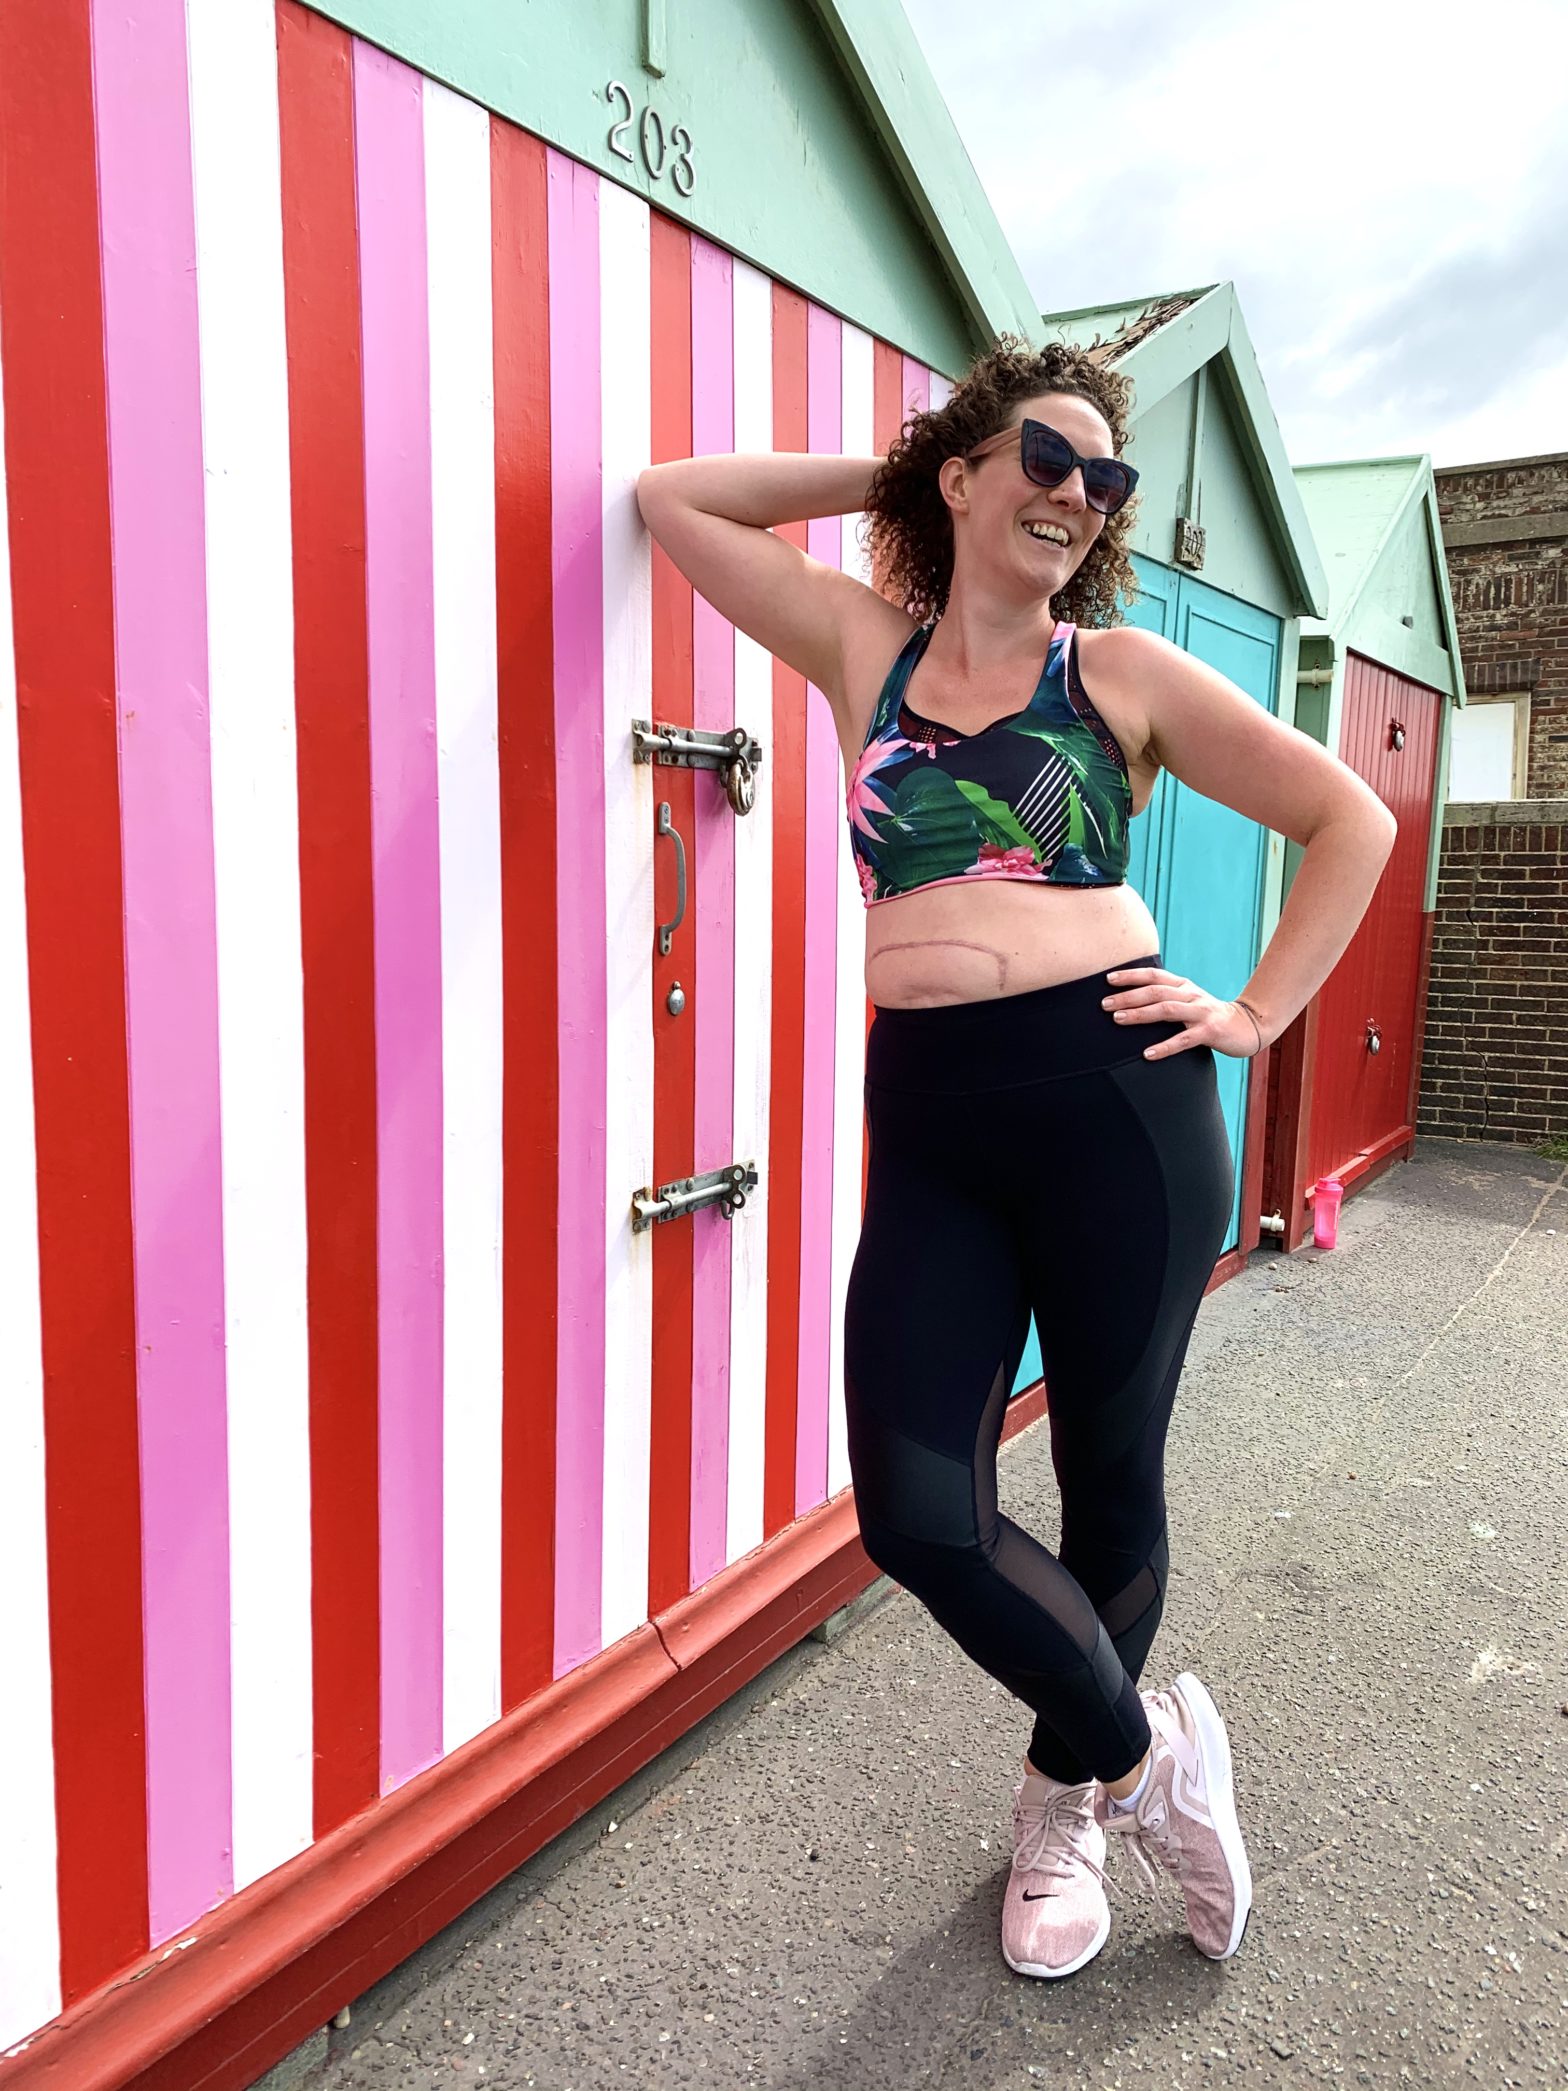 Personal Trainer Becky Hughes leans against a beach hut, smiling with sunglasses on